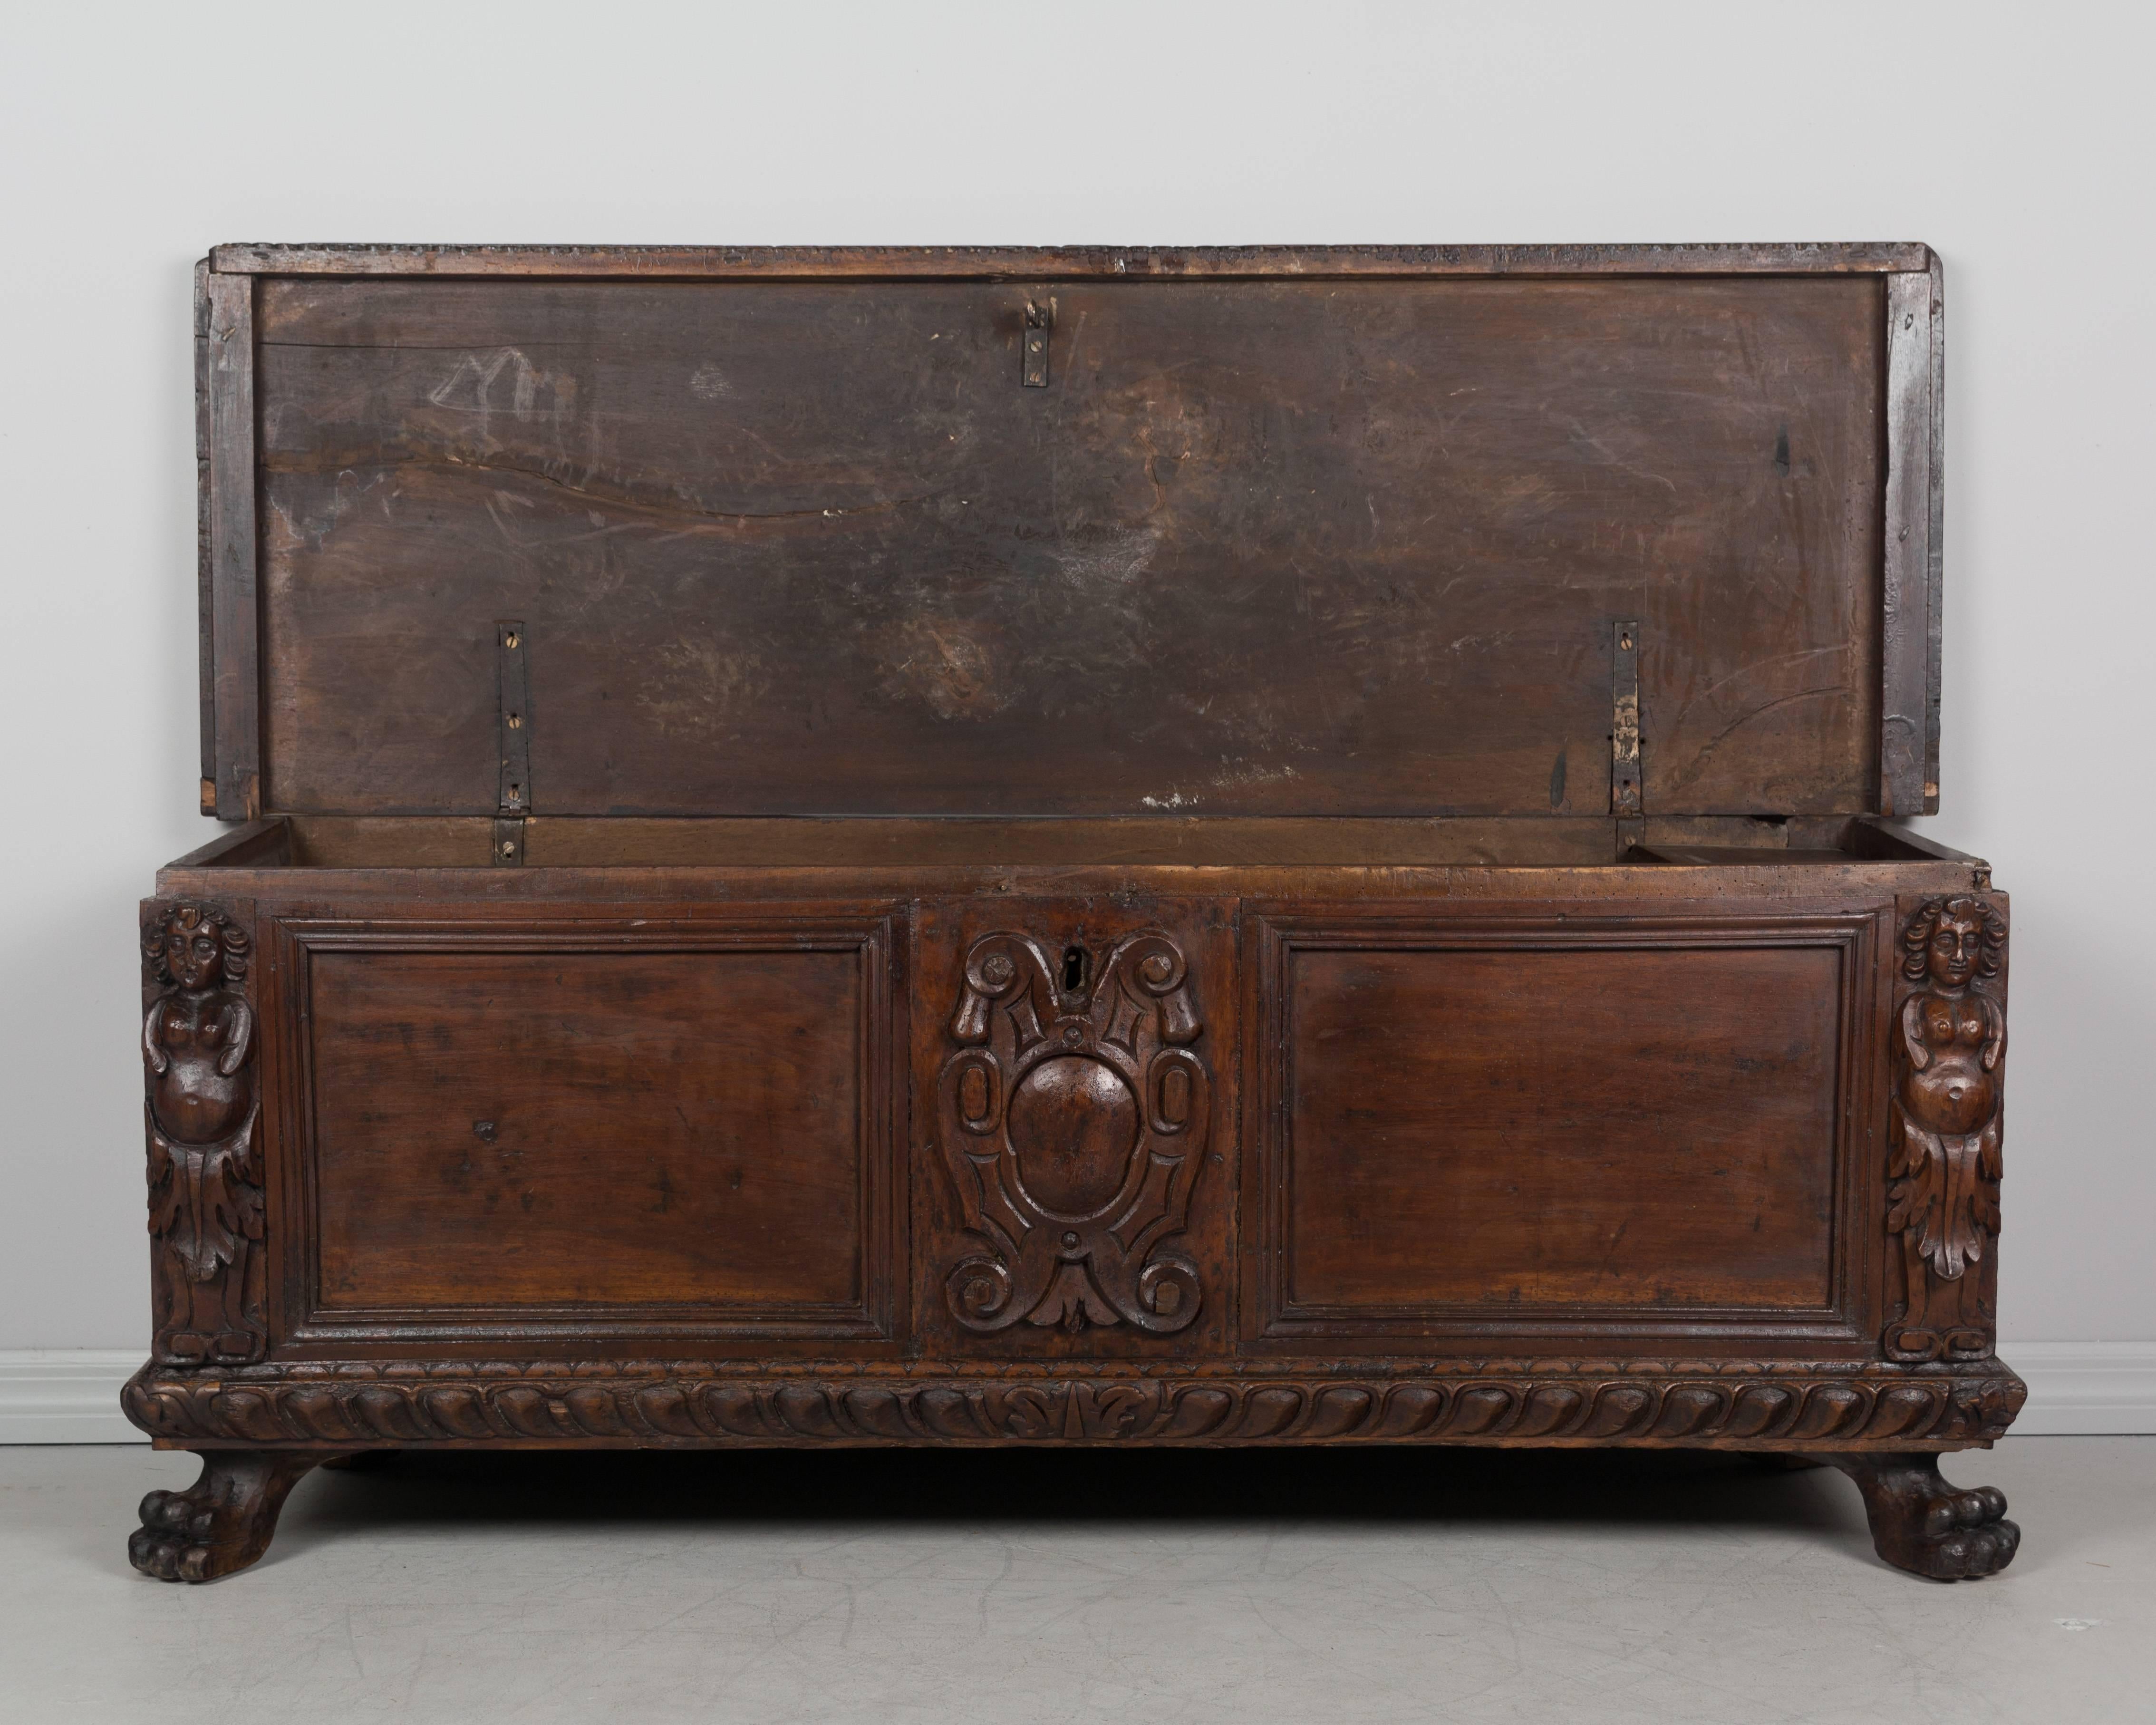 A fine 18th century Italian cassone, or large blanket chest, made of solid walnut. Bold details are hand carved in high relief and include a central crest, a pair of caryatids on the corners, dentil decoration along the top and bottom and large lion